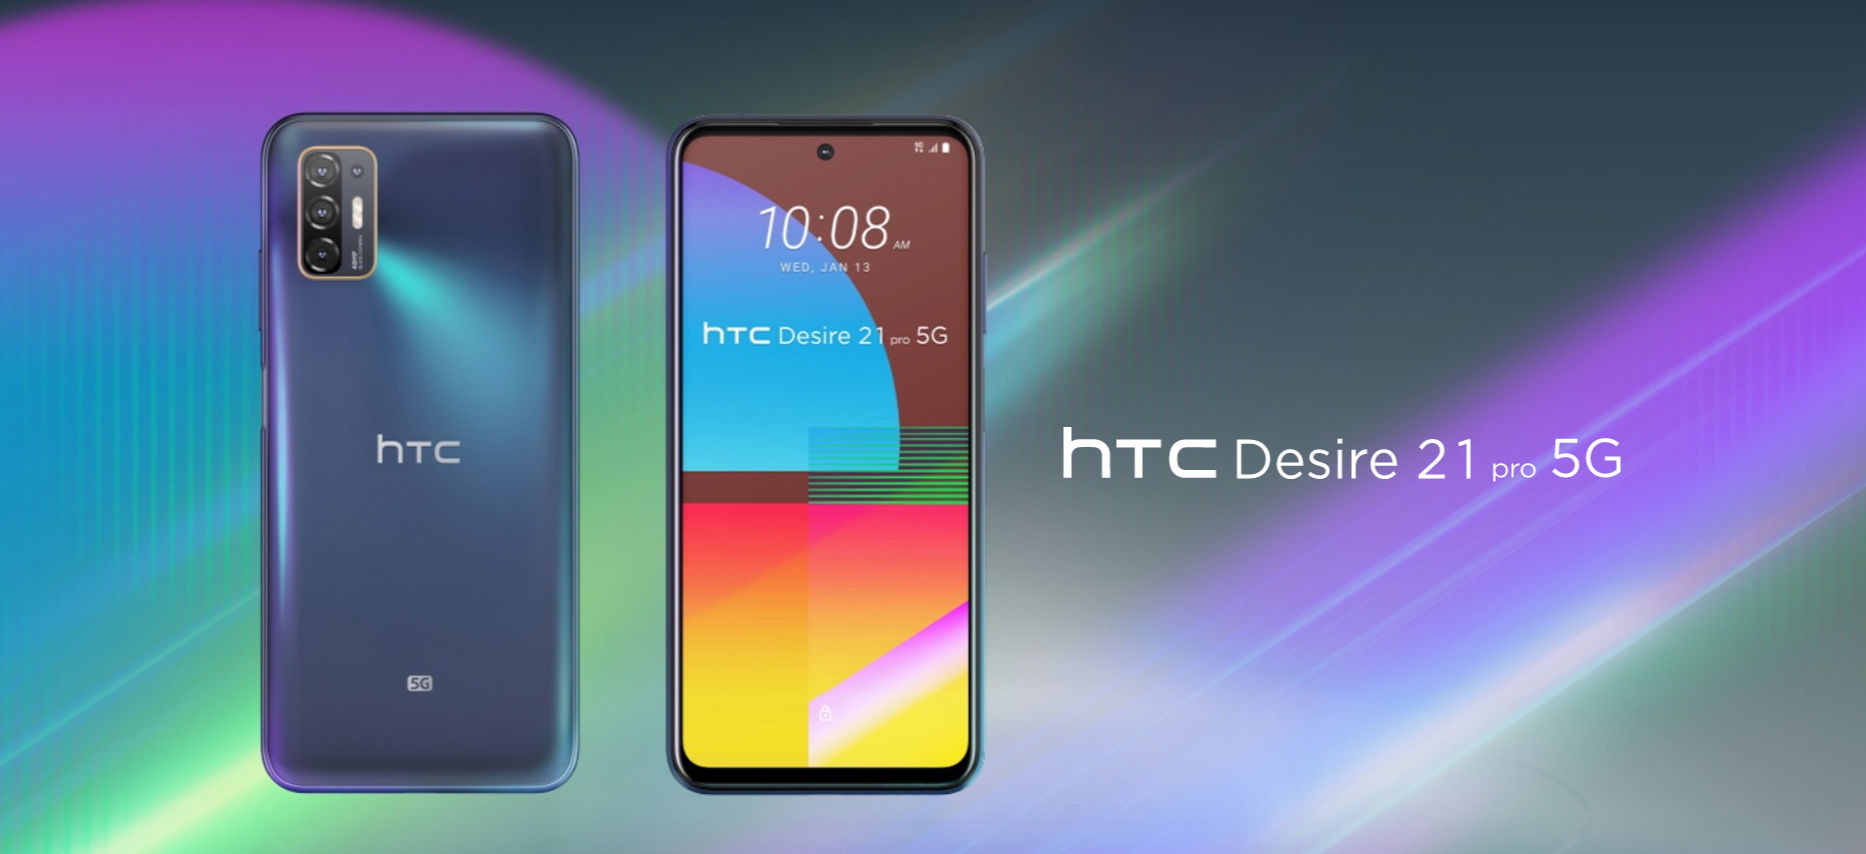 Htc Launches The Desire 21 Pro 5g With A Questionable Price For Its Specs Notebookcheck Net News